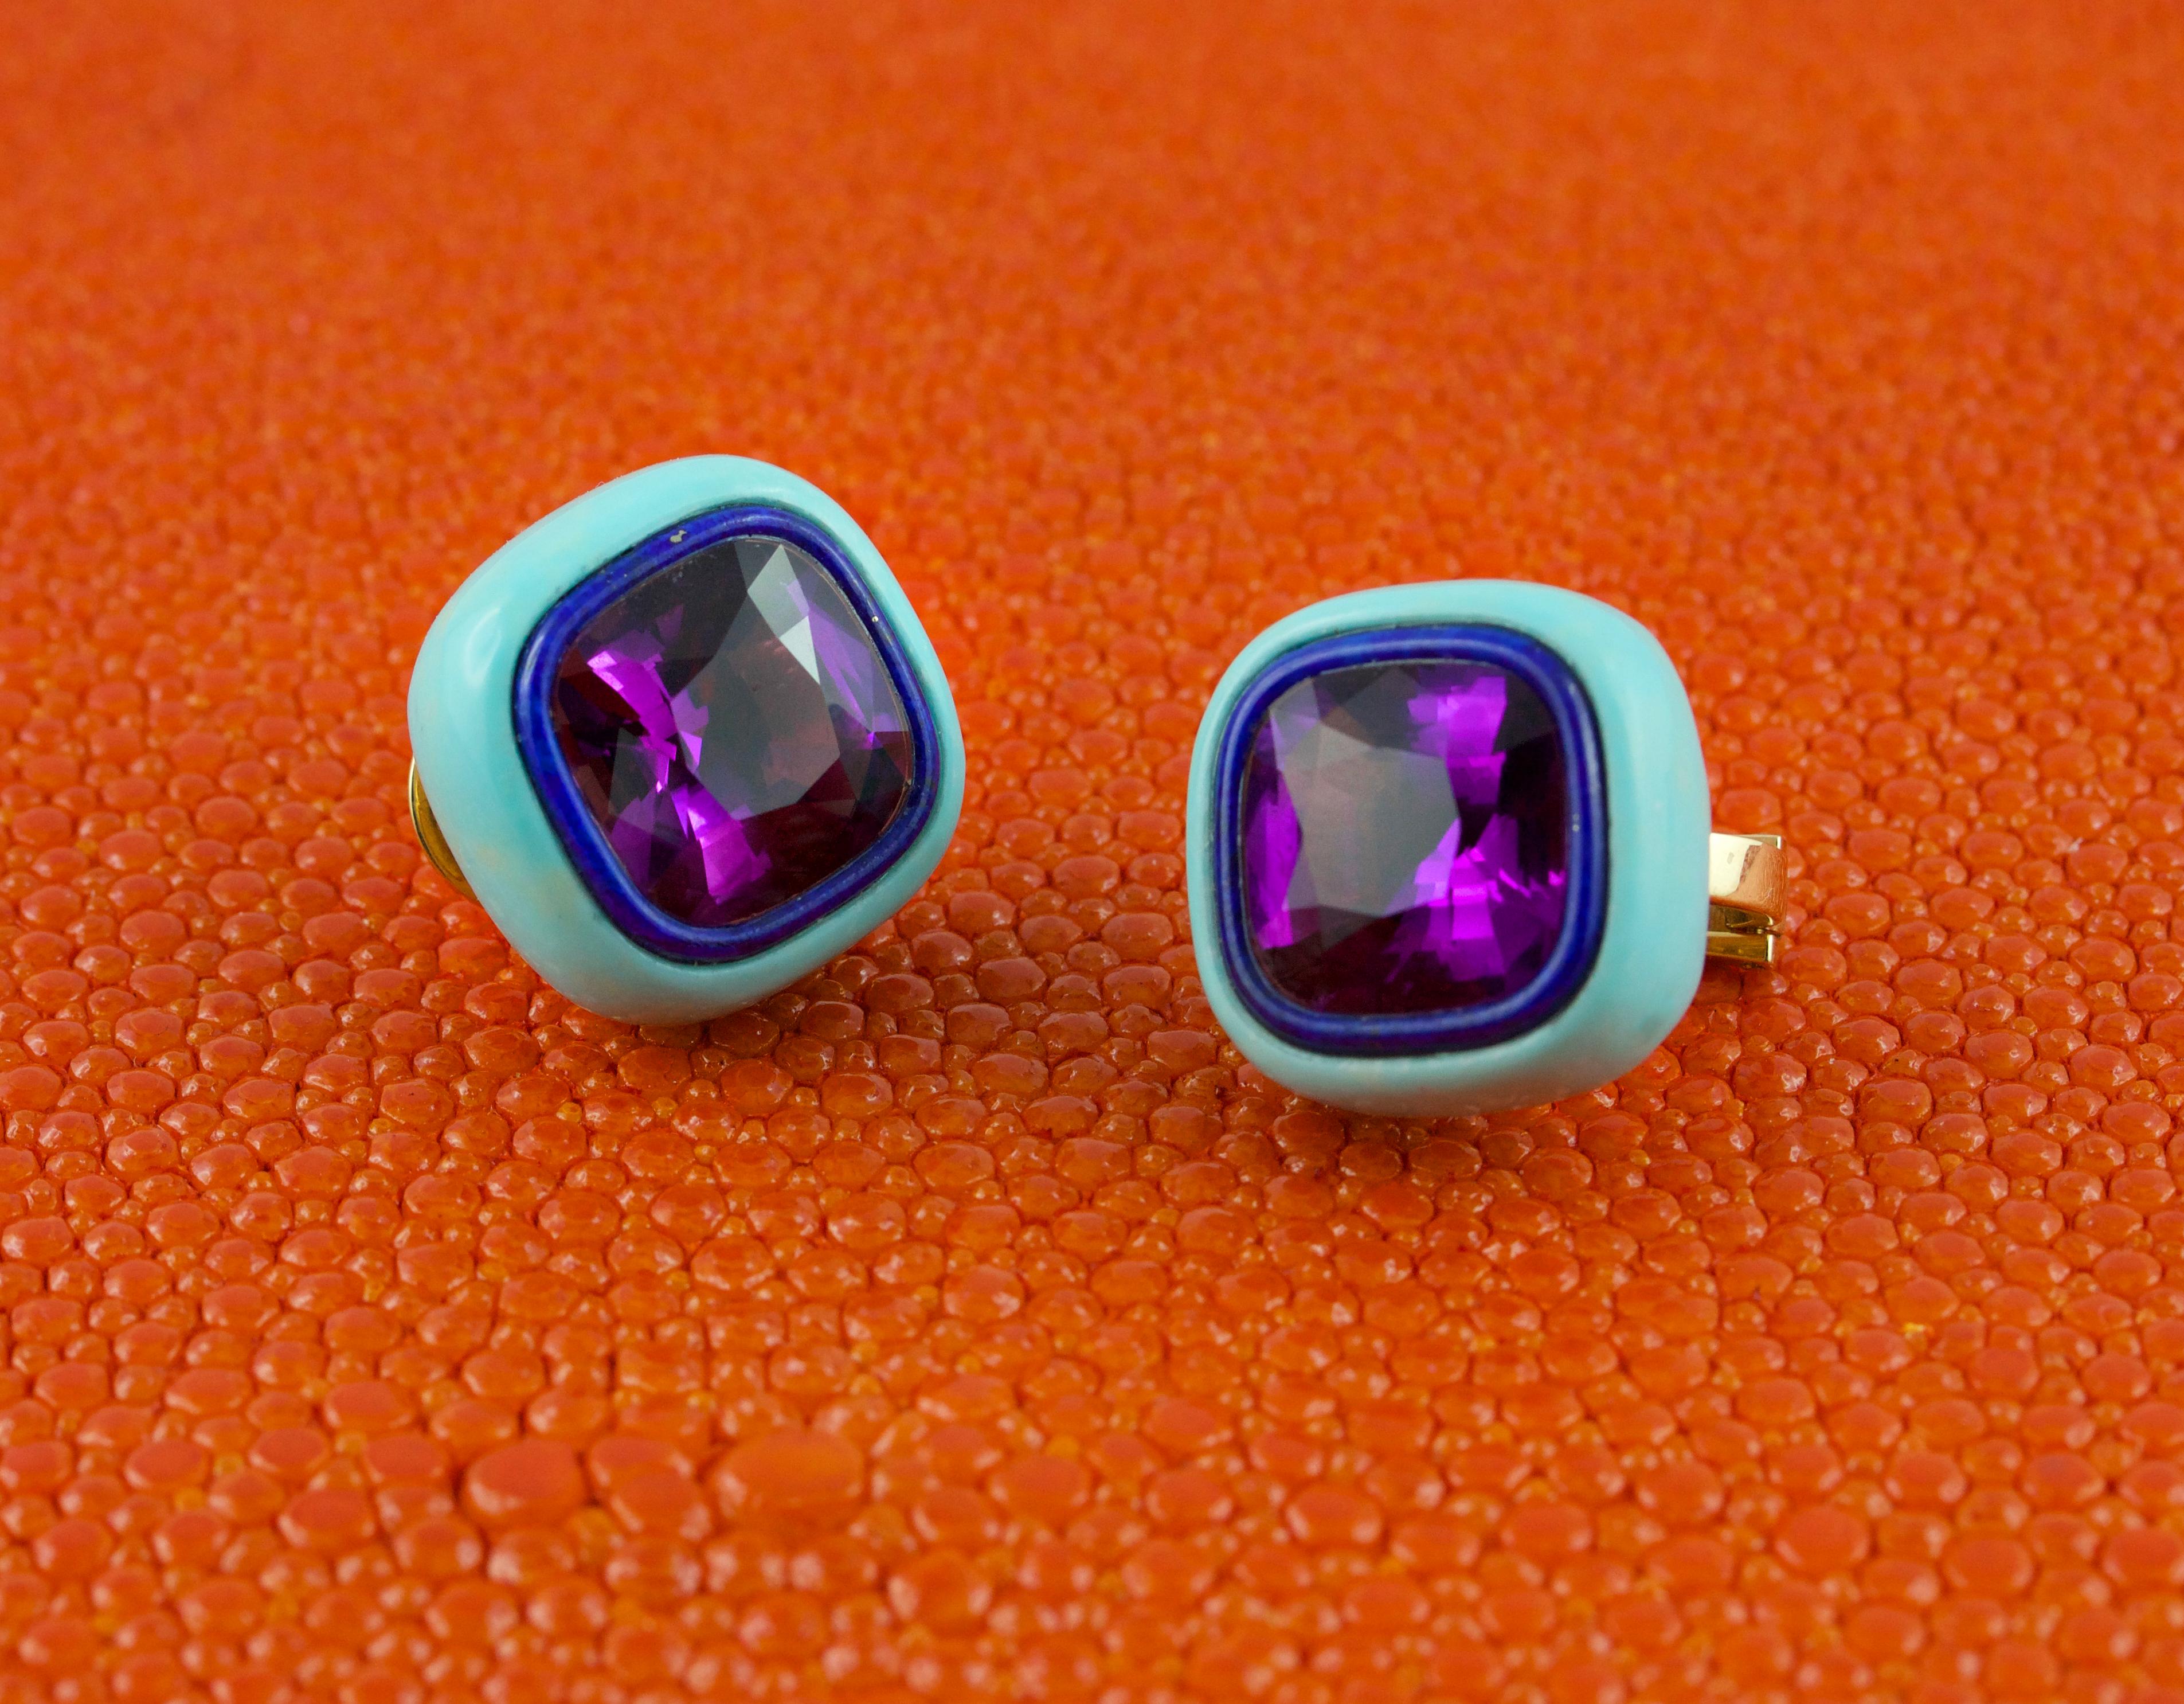 These gorgeous  AVGVSTA earrings are crafted in 18k yellow gold and beautifully set with asscher amethysts, embellished by a band of lapis lazuli and another band in natural turquoise.
The back of the earrings are in mother of pearl.

All AVGVSTA